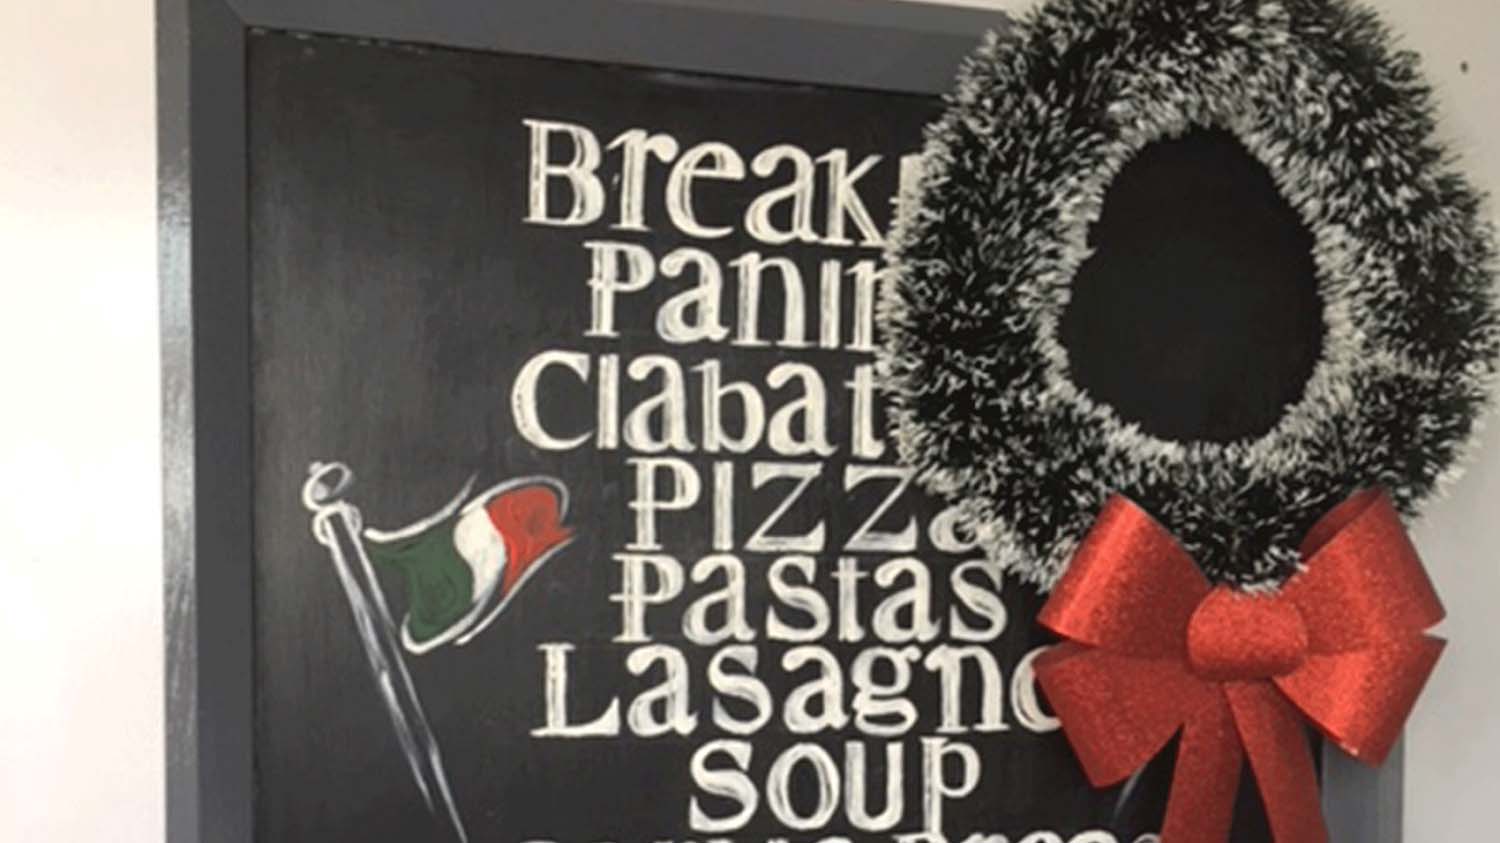 A sign outside the Italian in Loughborough which lists food items that they serve handwritten in a list. They are breakfast, panini, ciabatta, pizza, pastas, lasagna, and soup. The sign also has an Italian flag drawn on it and a green and red wreath hung on it to the right side.   